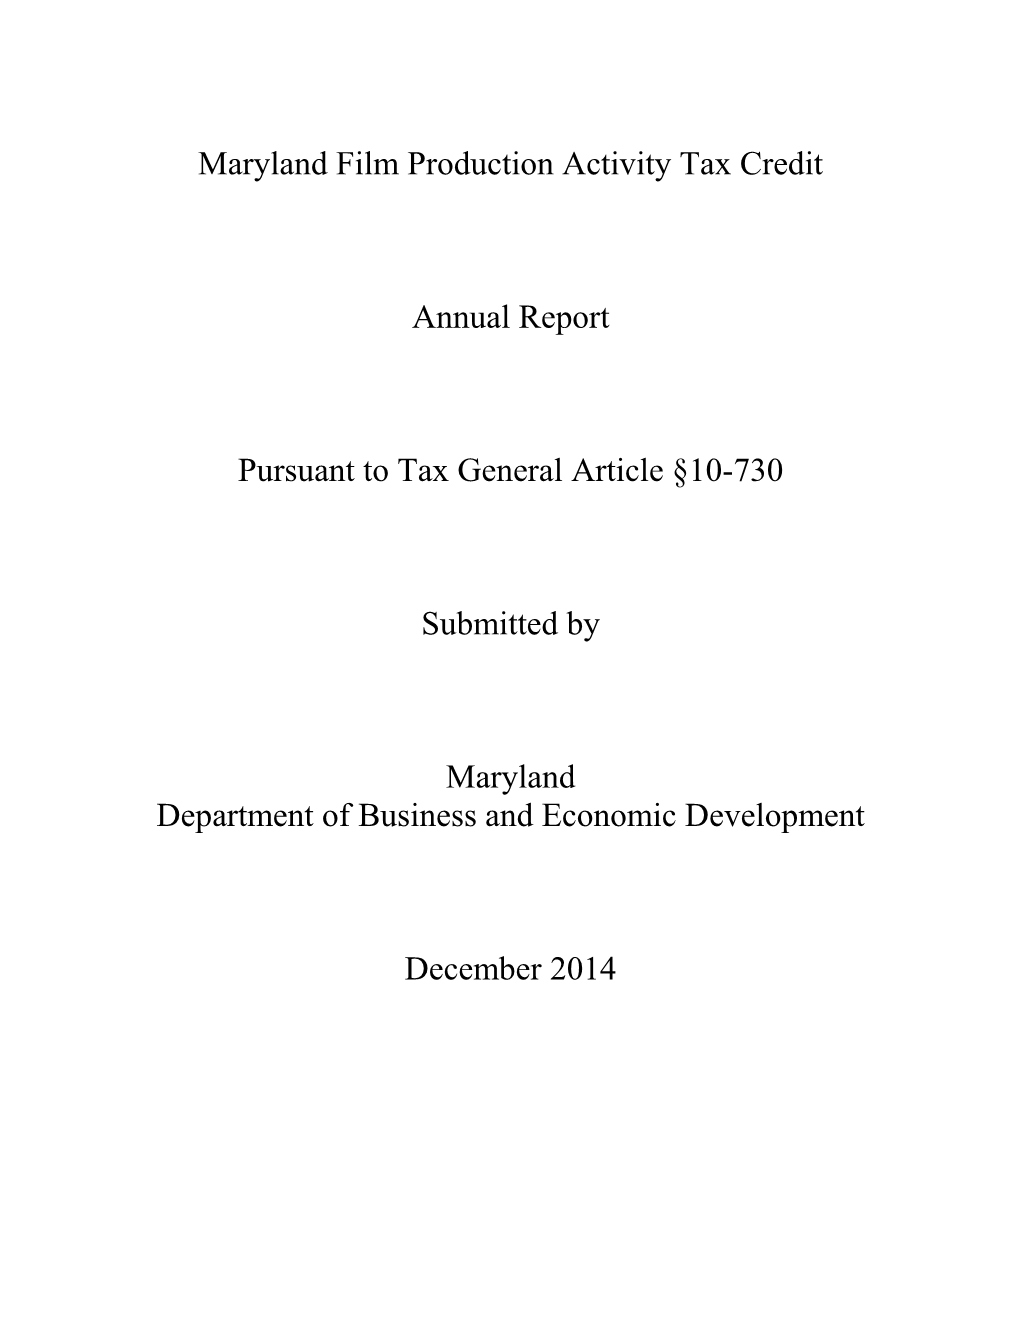 Film Production Activity Tax Credit Report 2014